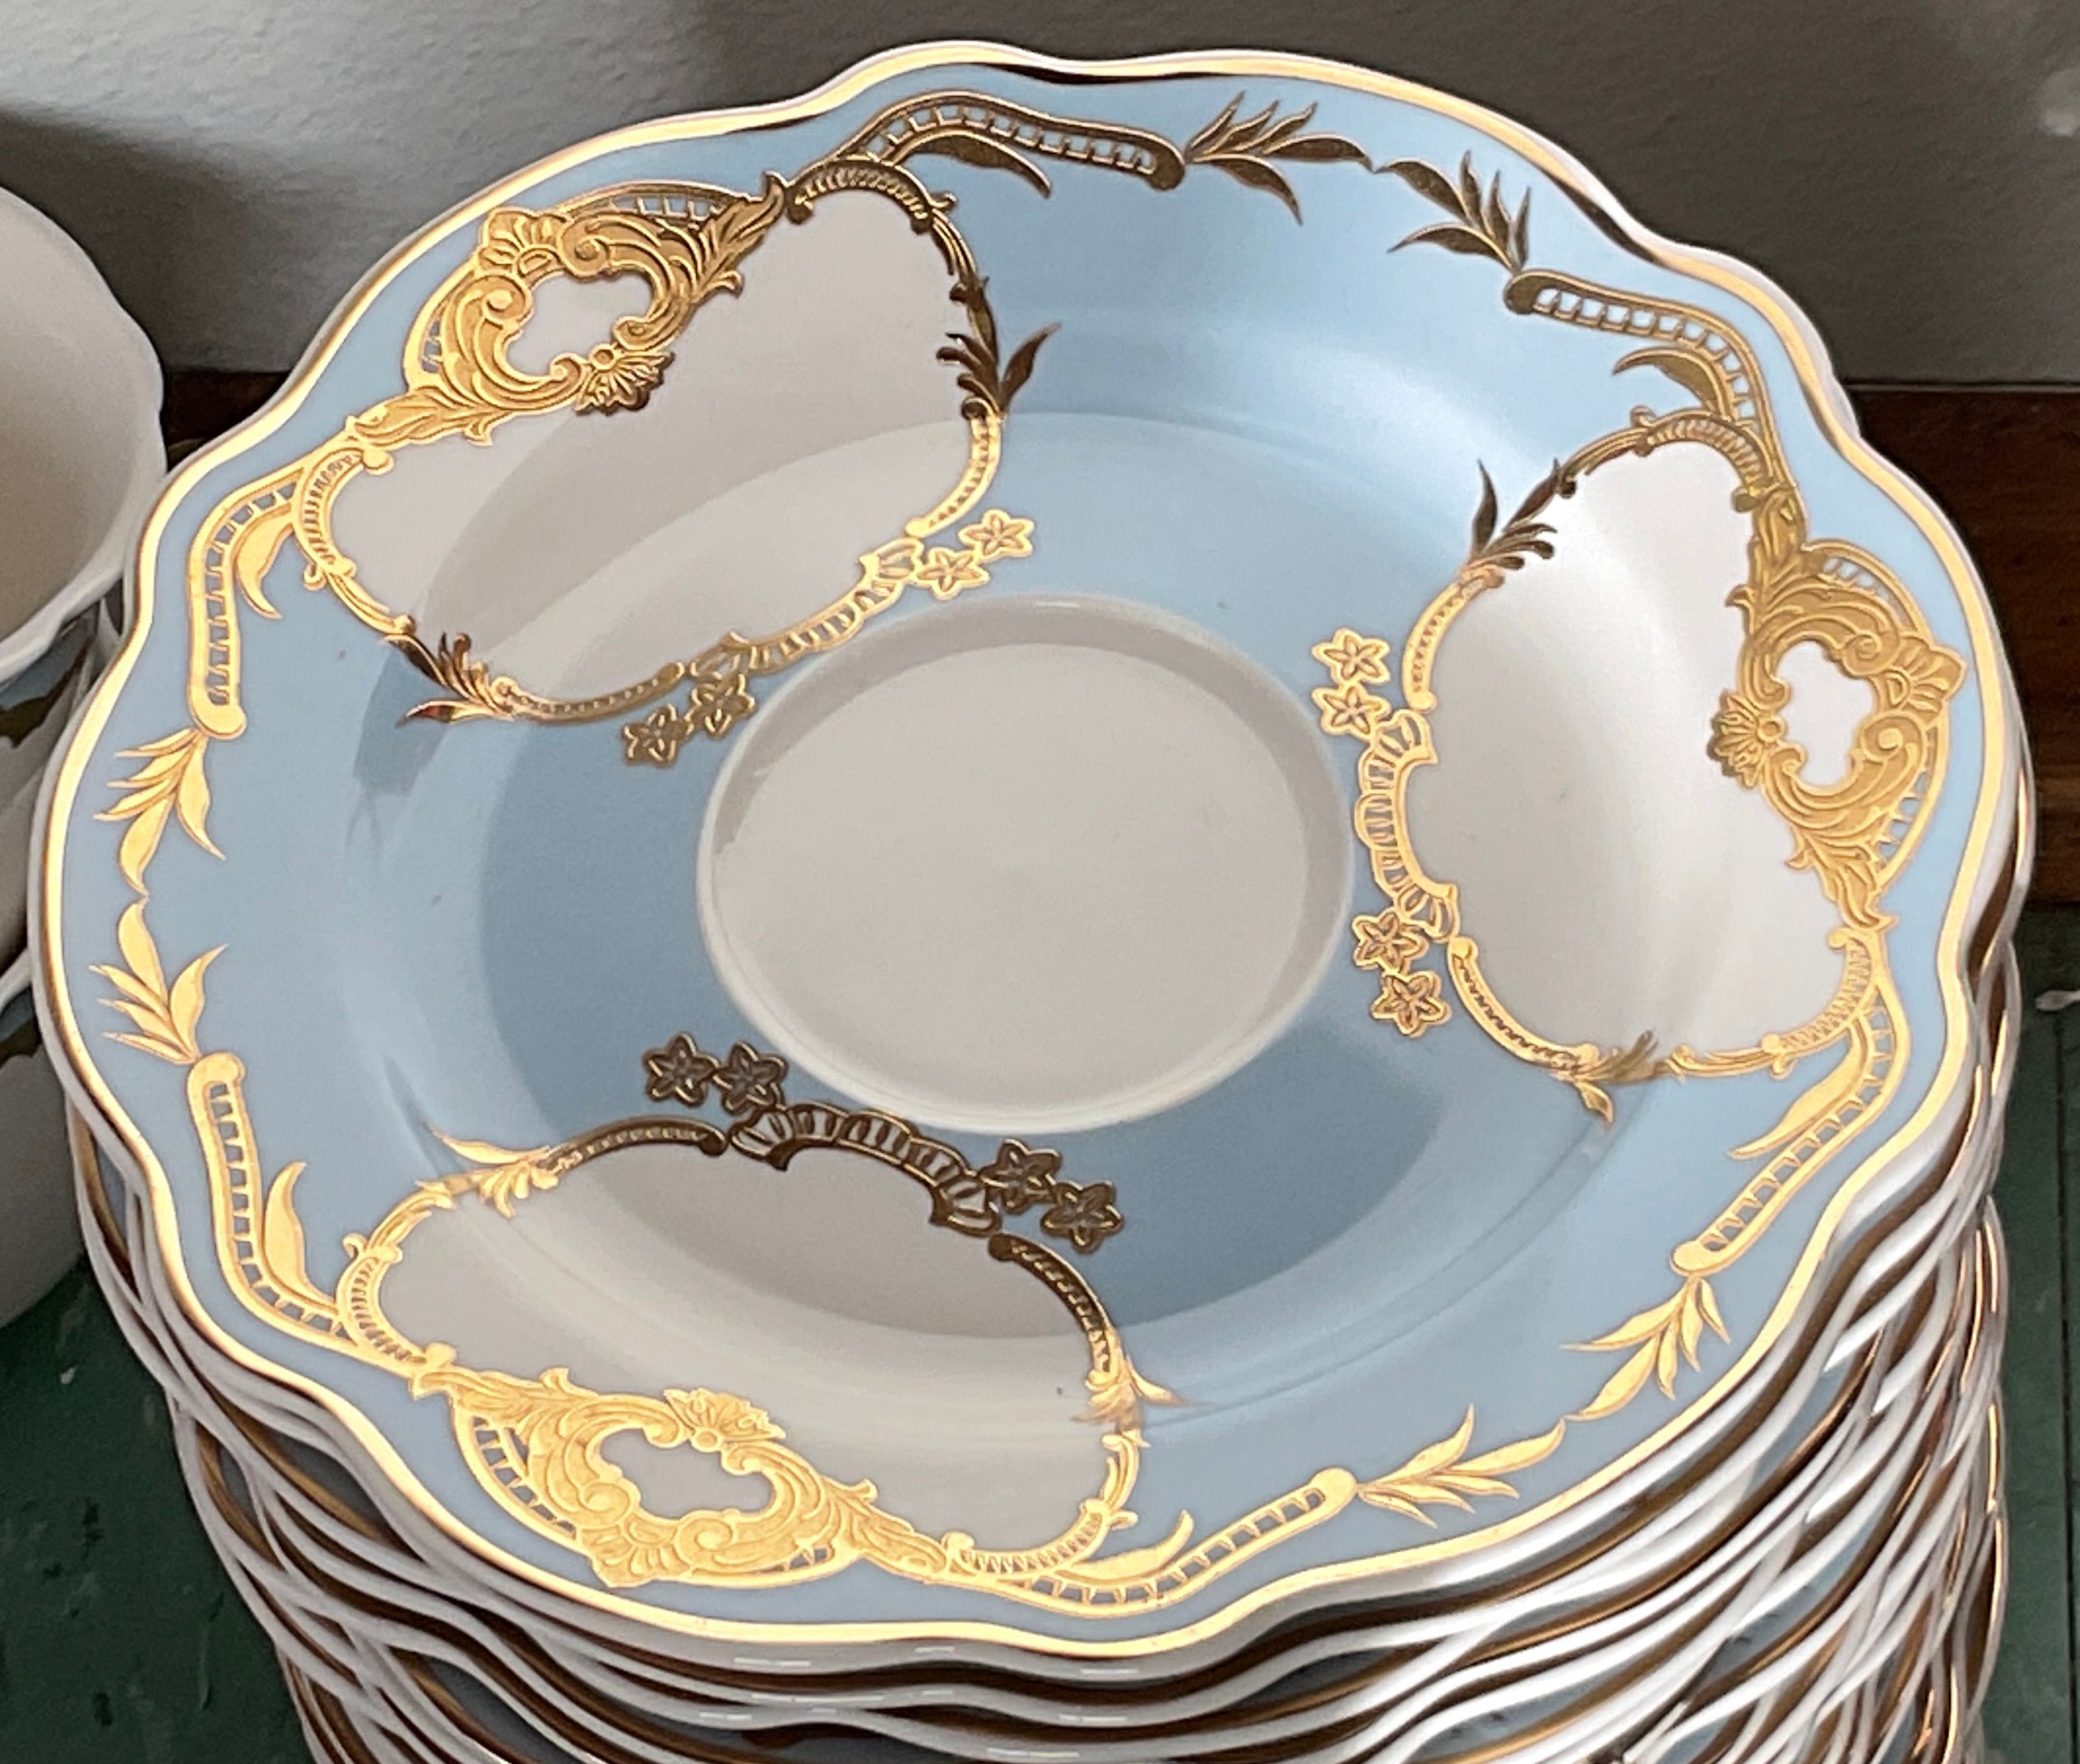 Queen Bee Plate, Porcelain – Angioletti Designs